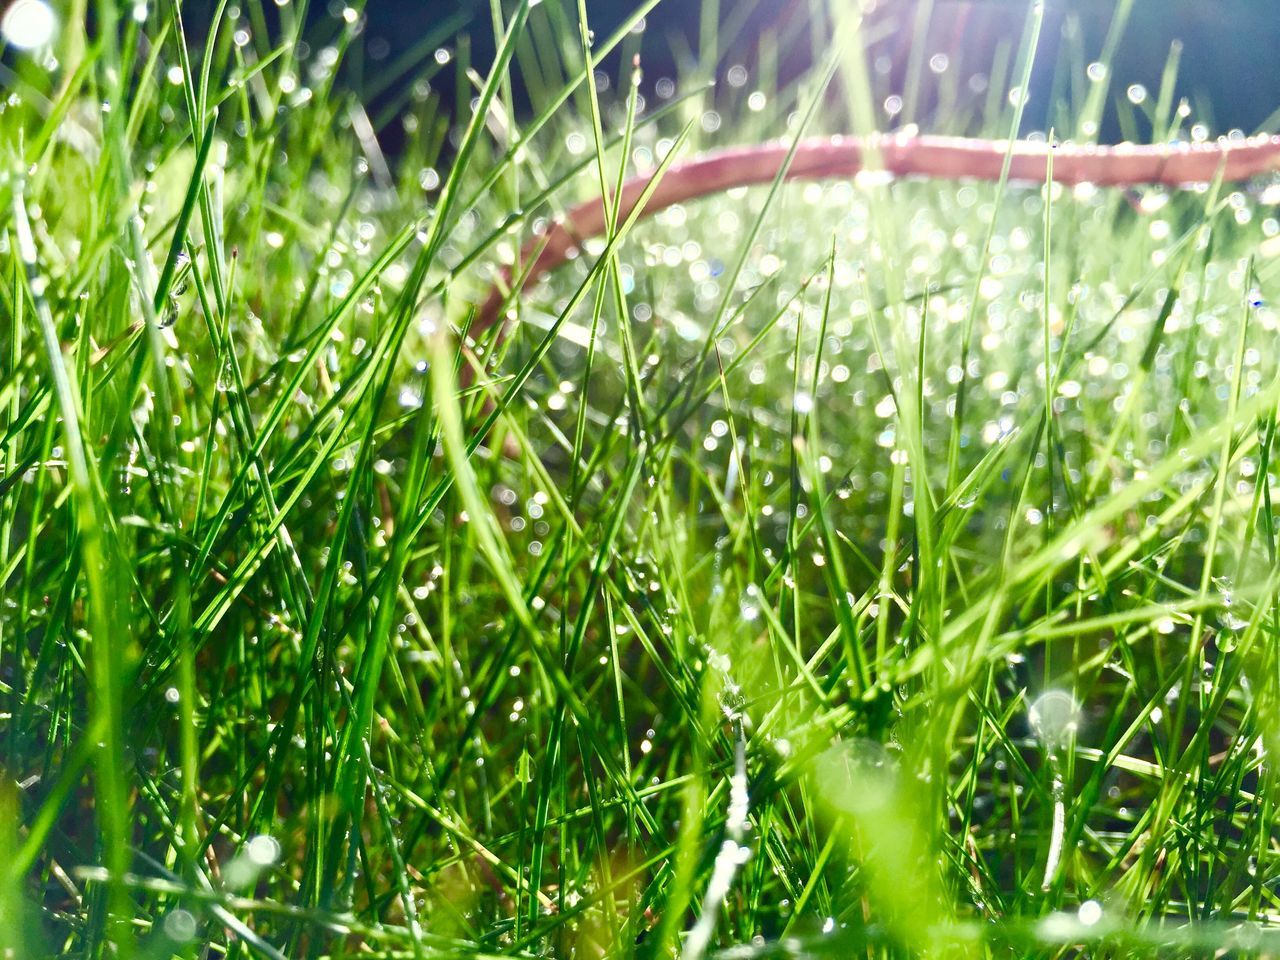 grass, drop, growth, close-up, blade of grass, water, green color, nature, focus on foreground, field, plant, wet, dew, beauty in nature, selective focus, freshness, tranquility, grassy, spider web, fragility